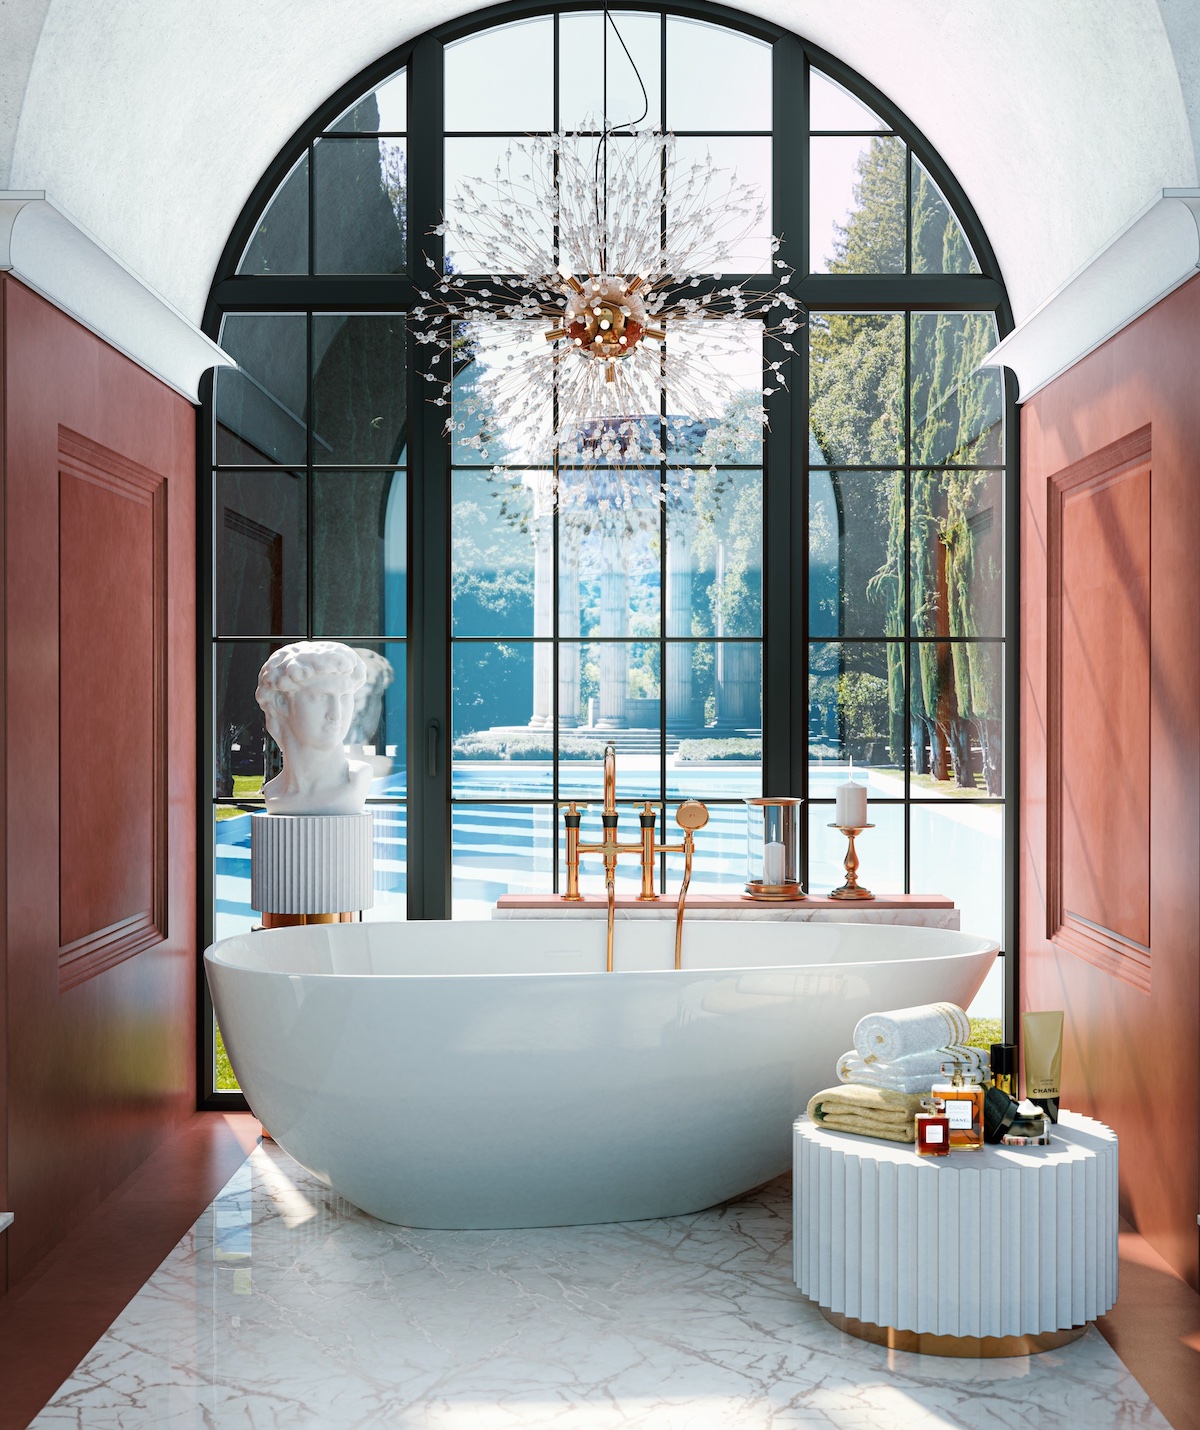 vignola bath with red and white walls